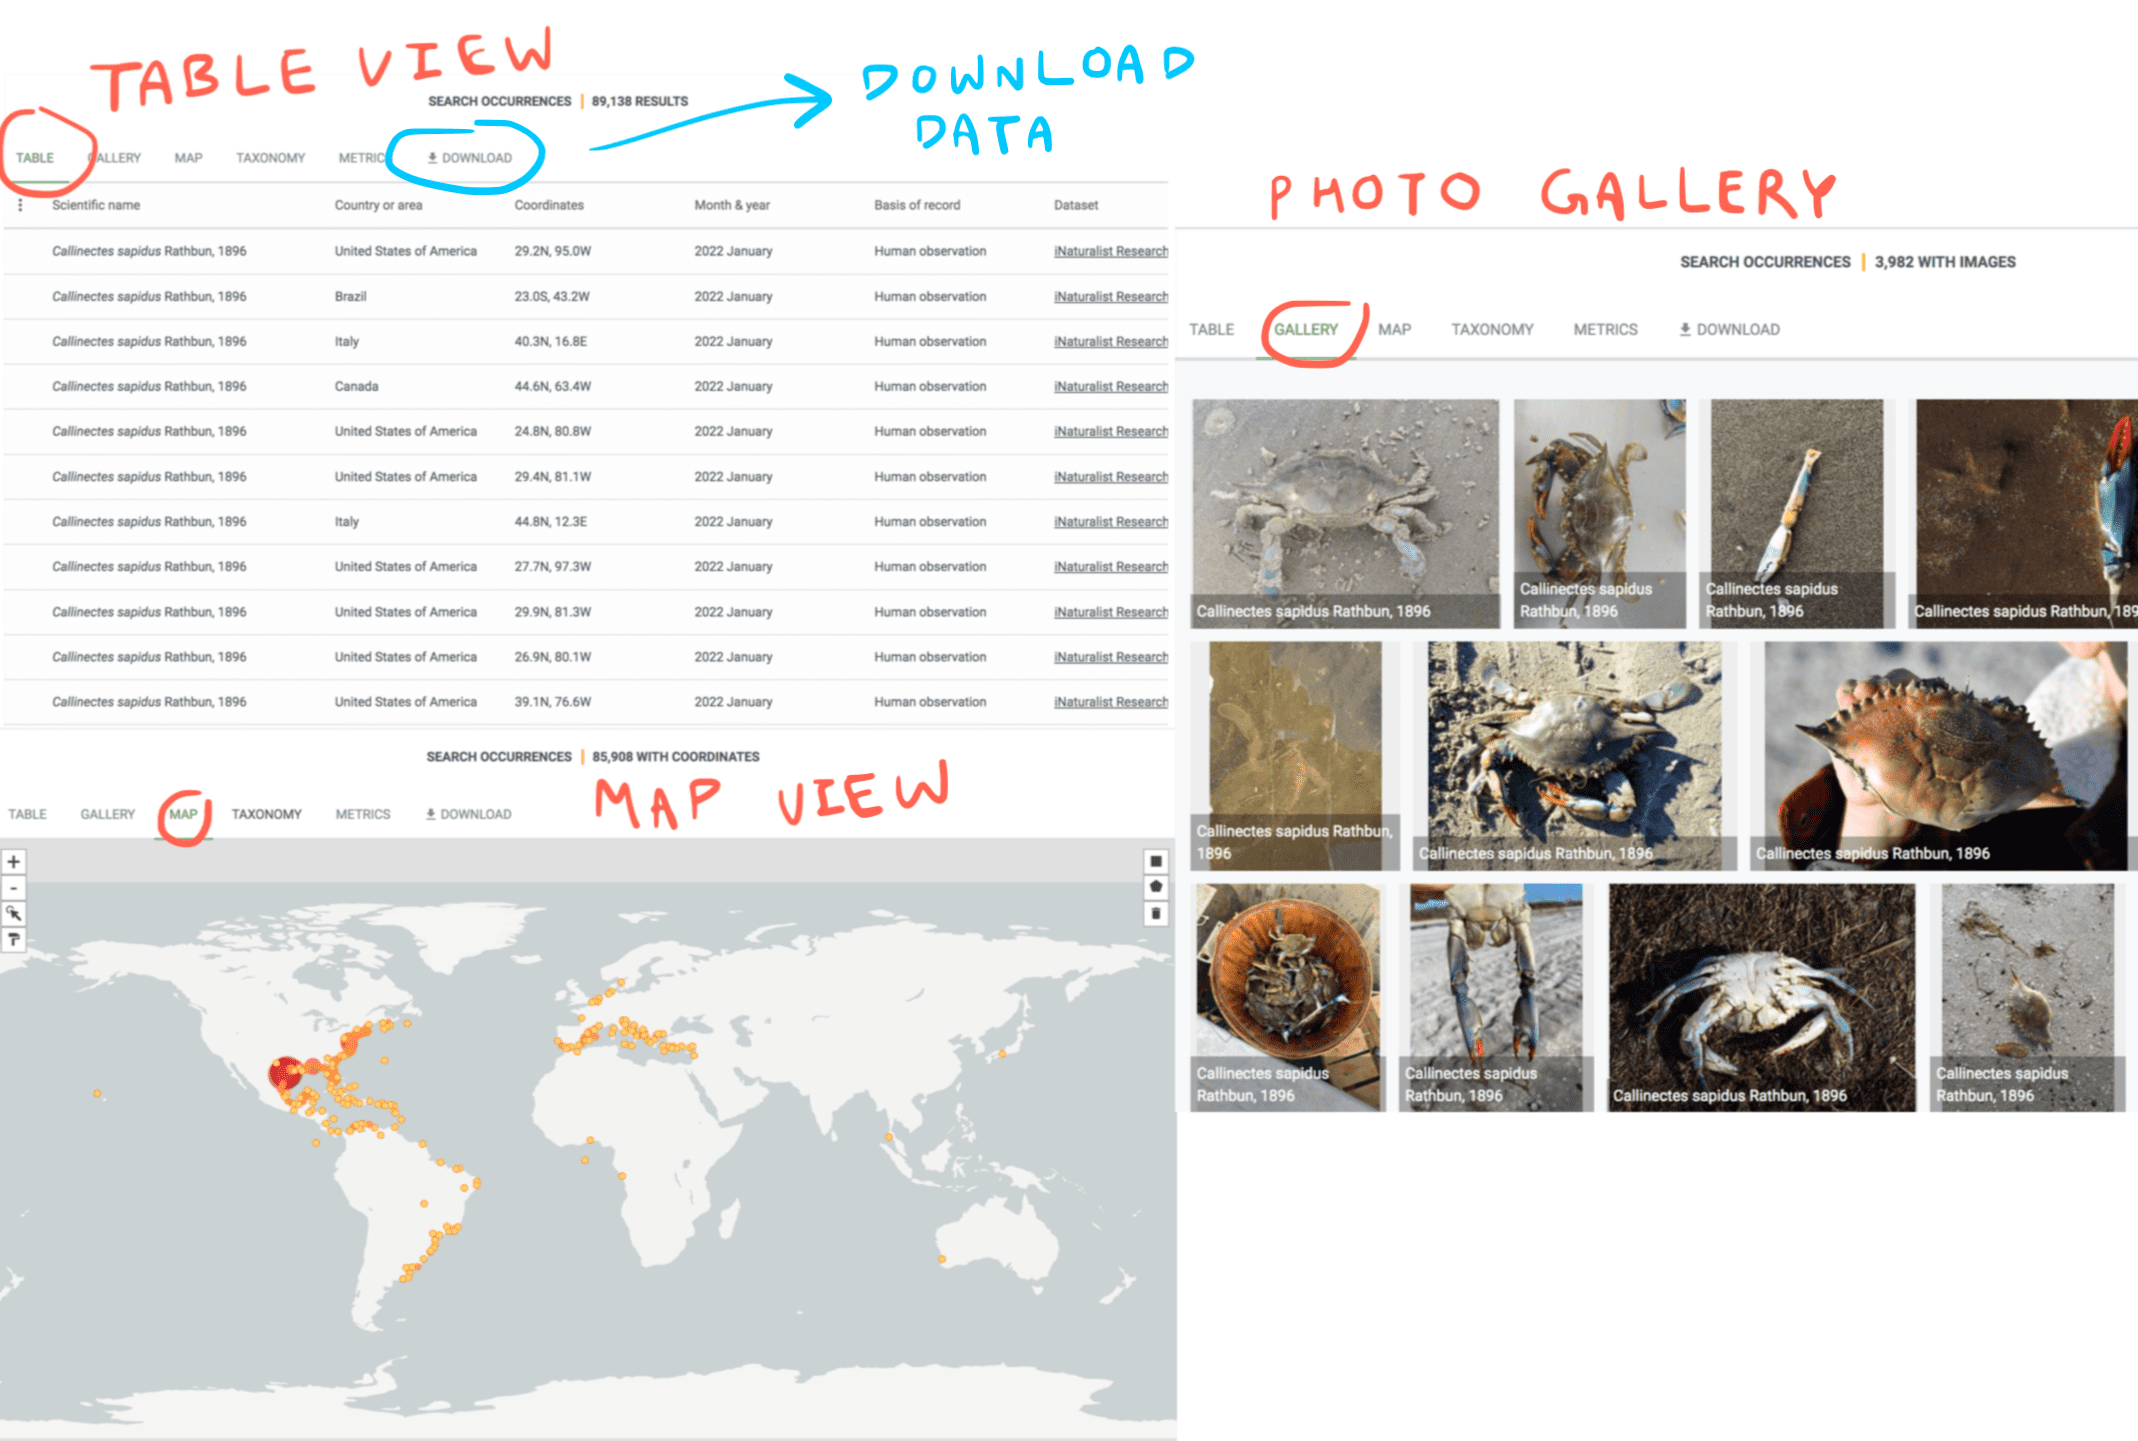 Image showing the table and map views for the occurrence data, as well as the photo gallery. An arrow also indicates where the download button is located.